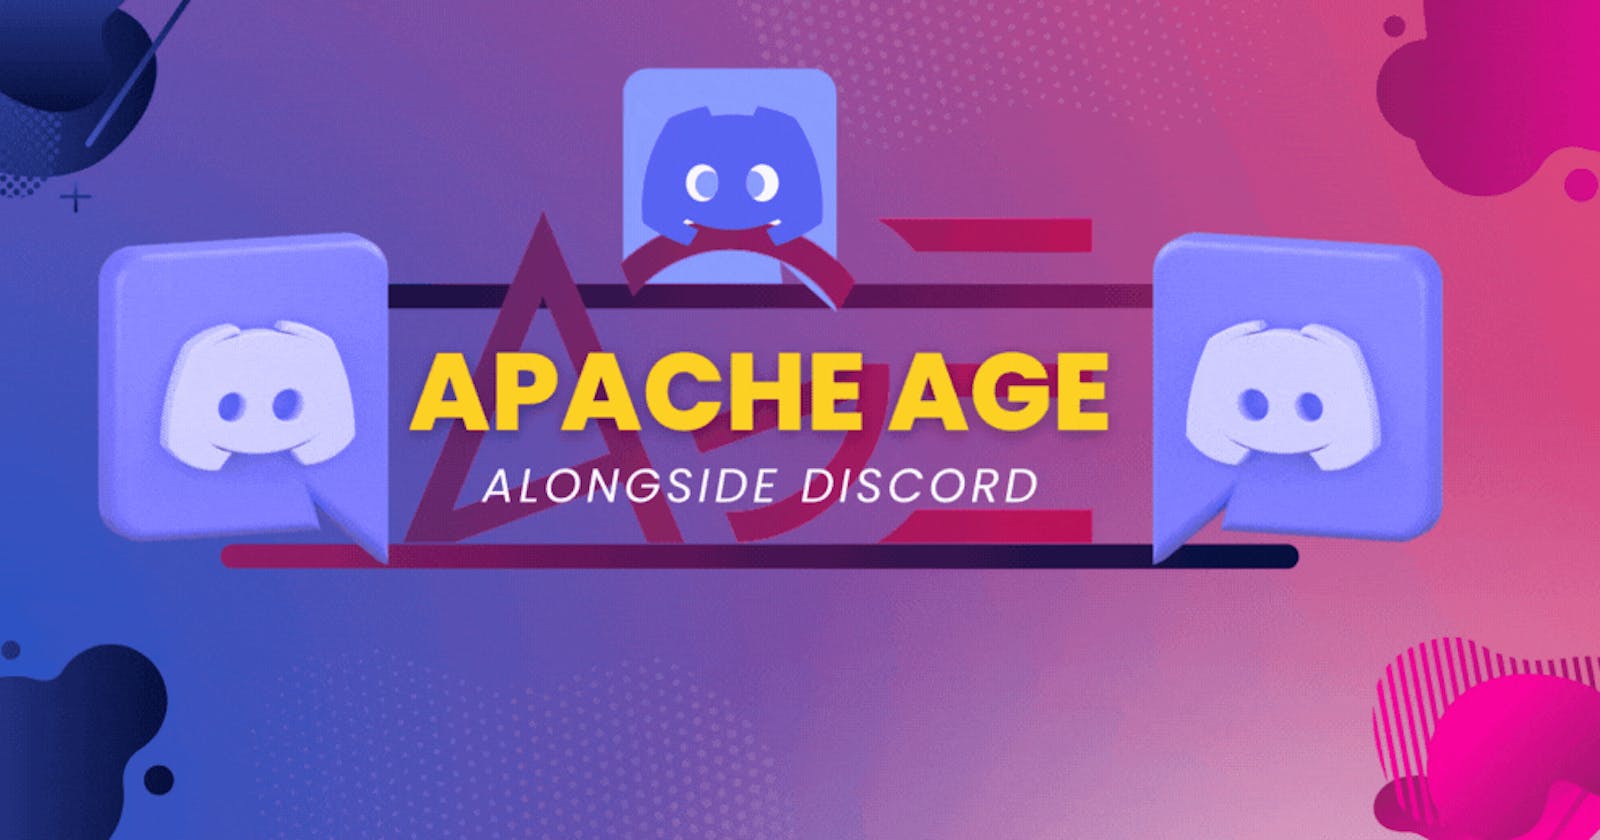 The Next AGE of Discord